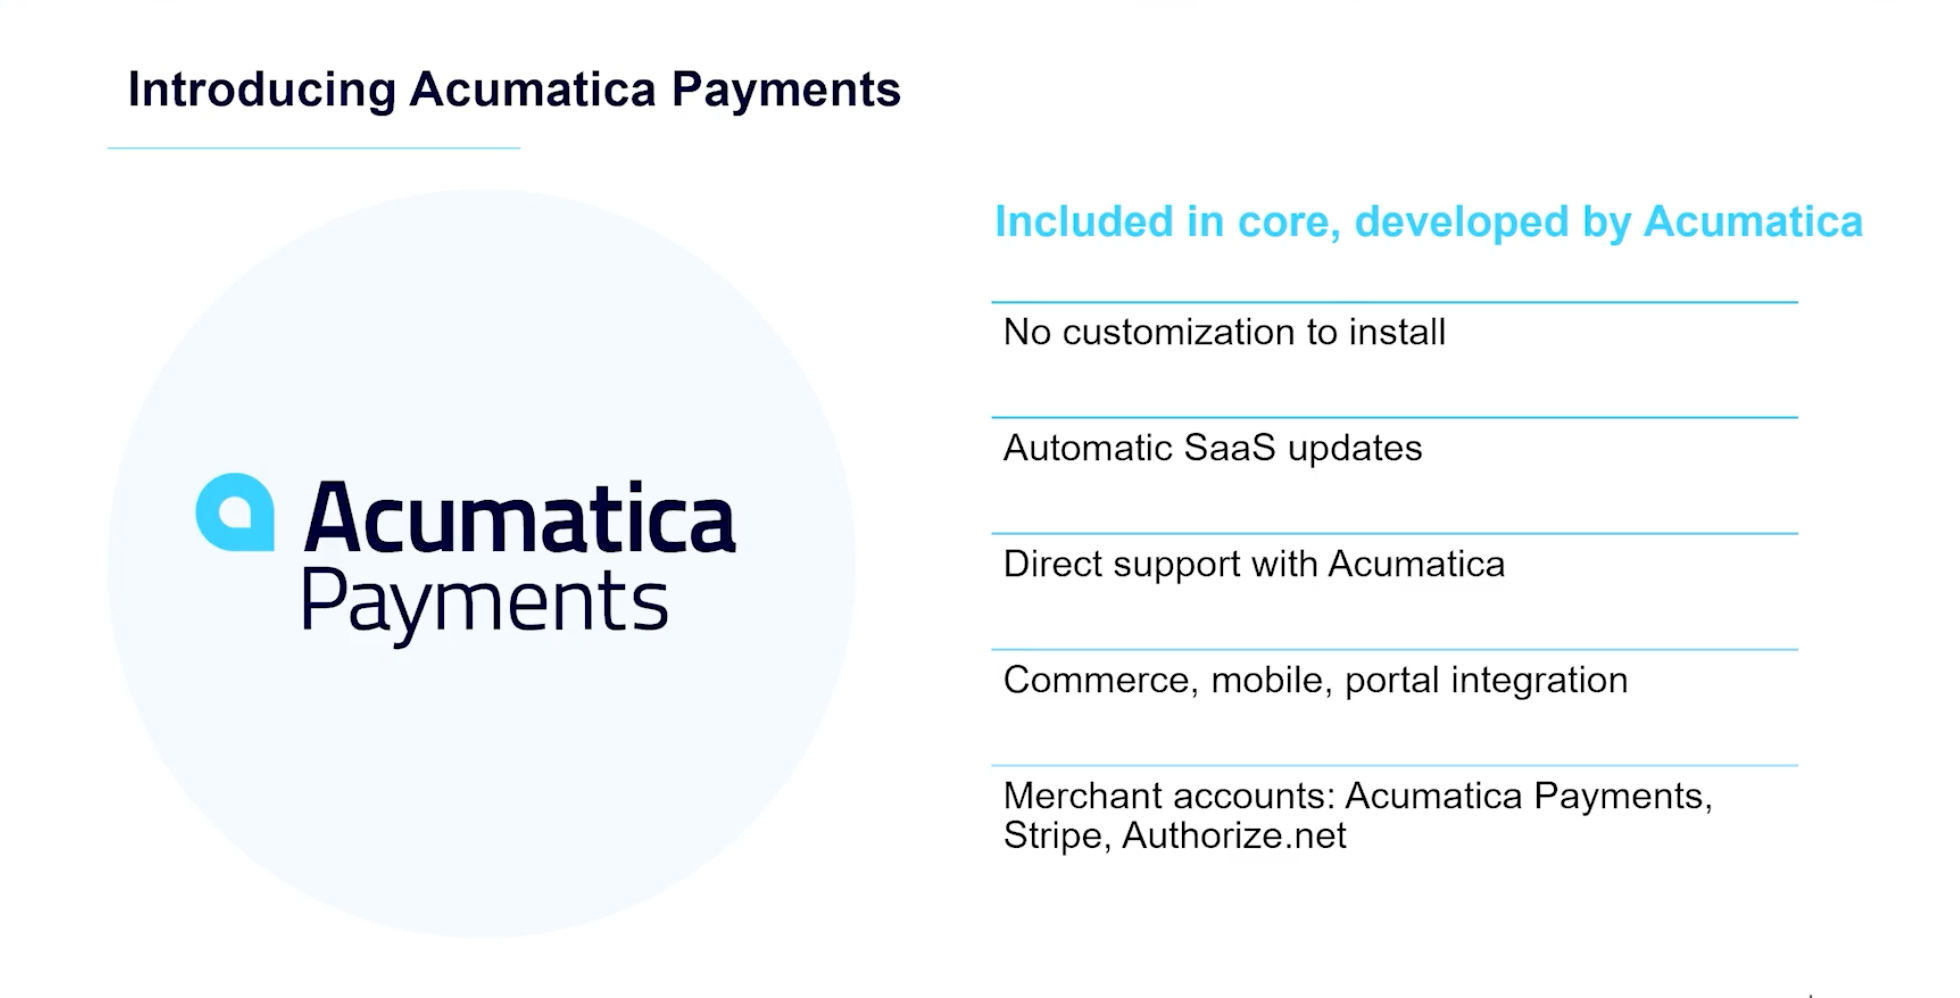 Acumatica ERP Payments: no customizations to install, automatic SaaS updates, Direct support with Acumatica